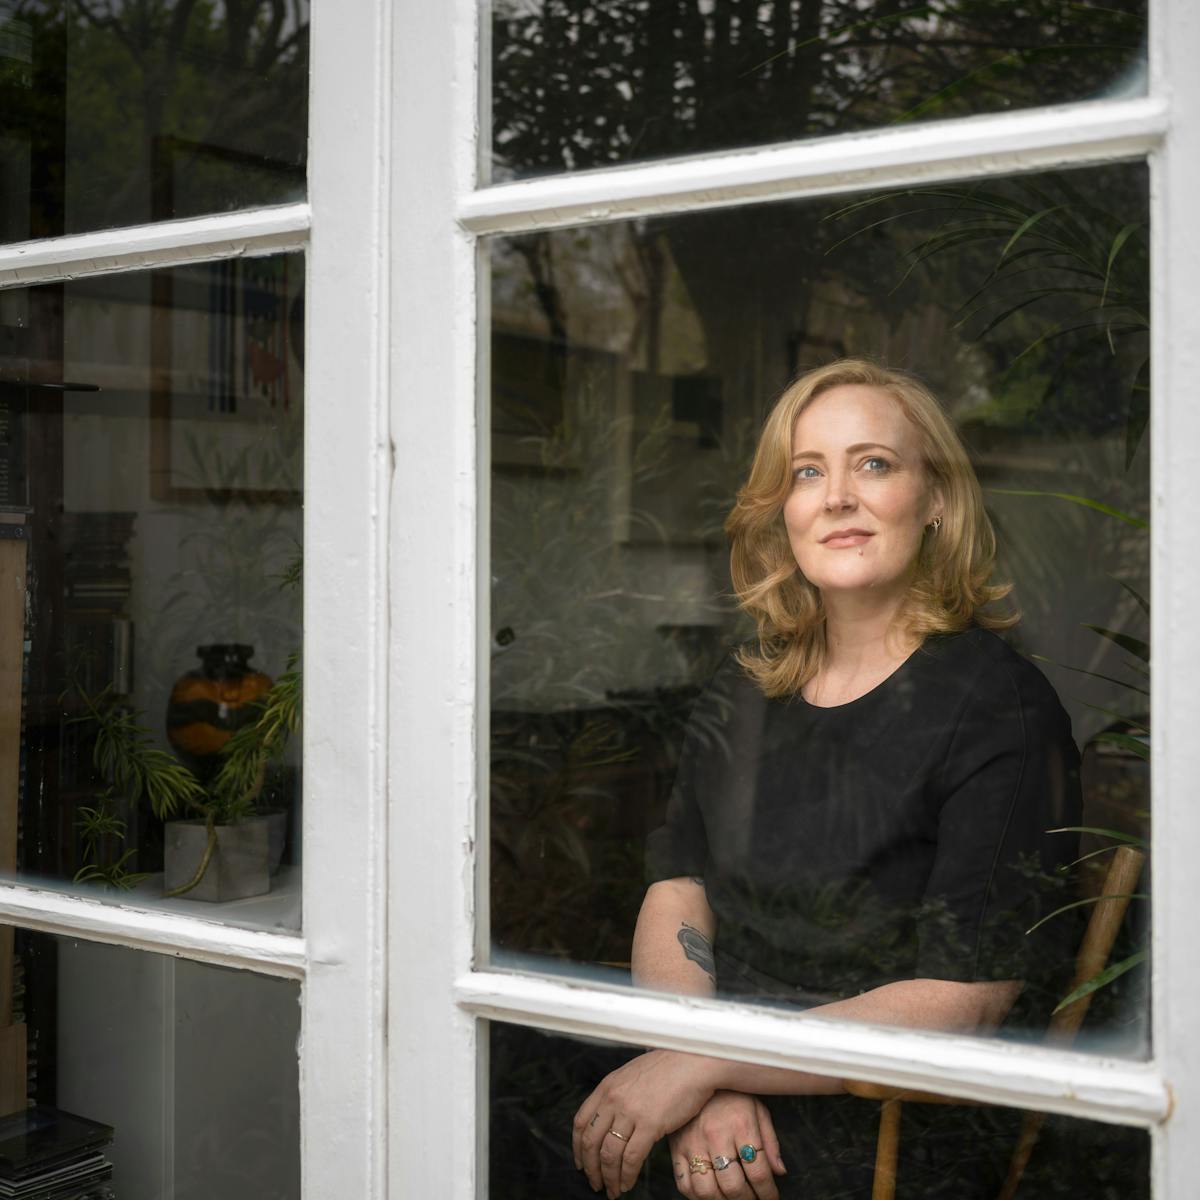 Photograph of a blonde woman with black clothing looking through a window, captured from outside.  The woman is sitting on a wooden chair with her arms crossed at the wrists with her gaze towards the top right of the frame.